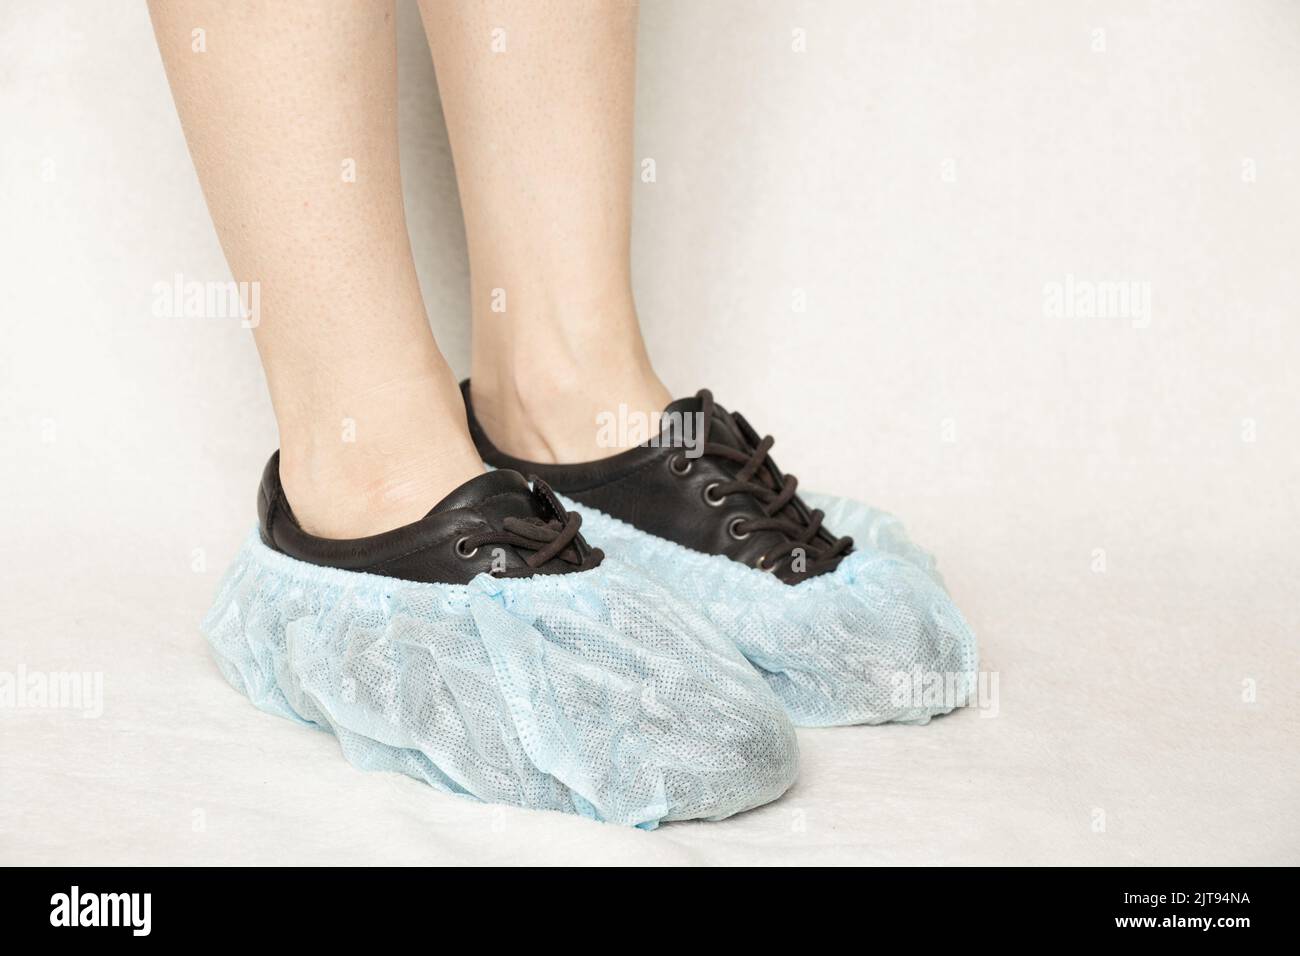 female legs in black shoes and blue disposable boots on a white background, protective shoe covers, shoe covers Stock Photo